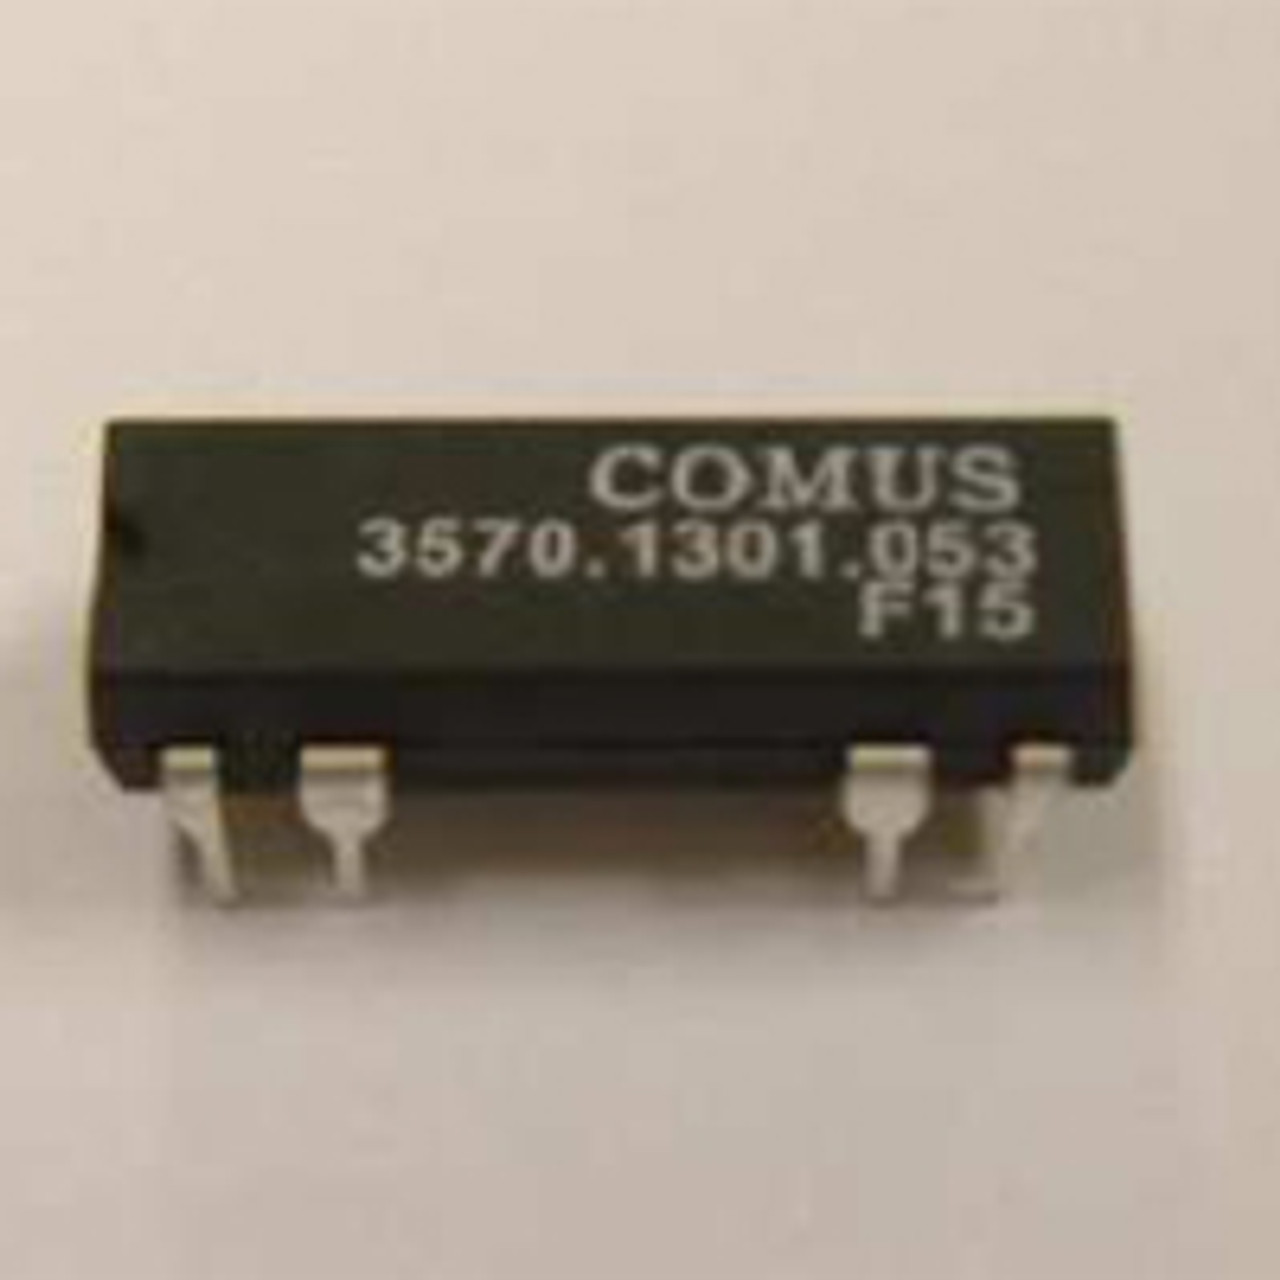 Comus 3570-1301-153 Reed Relays